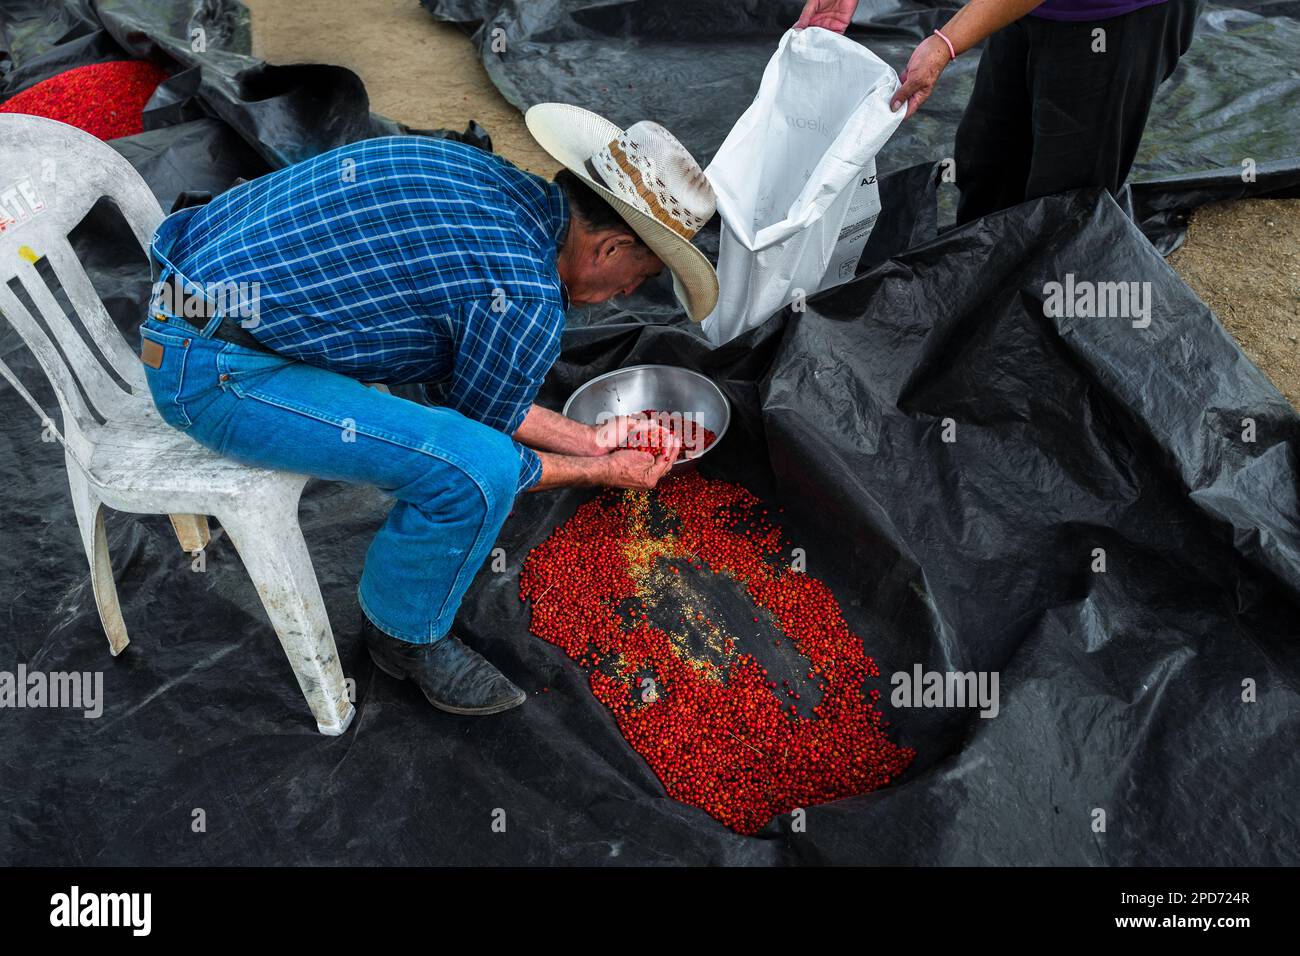 A Mexican rancher collects sun-dried chiltepin peppers, a wild variety of chili pepper, into a sack on a farm near Baviácora, Sonora, Mexico. Stock Photo